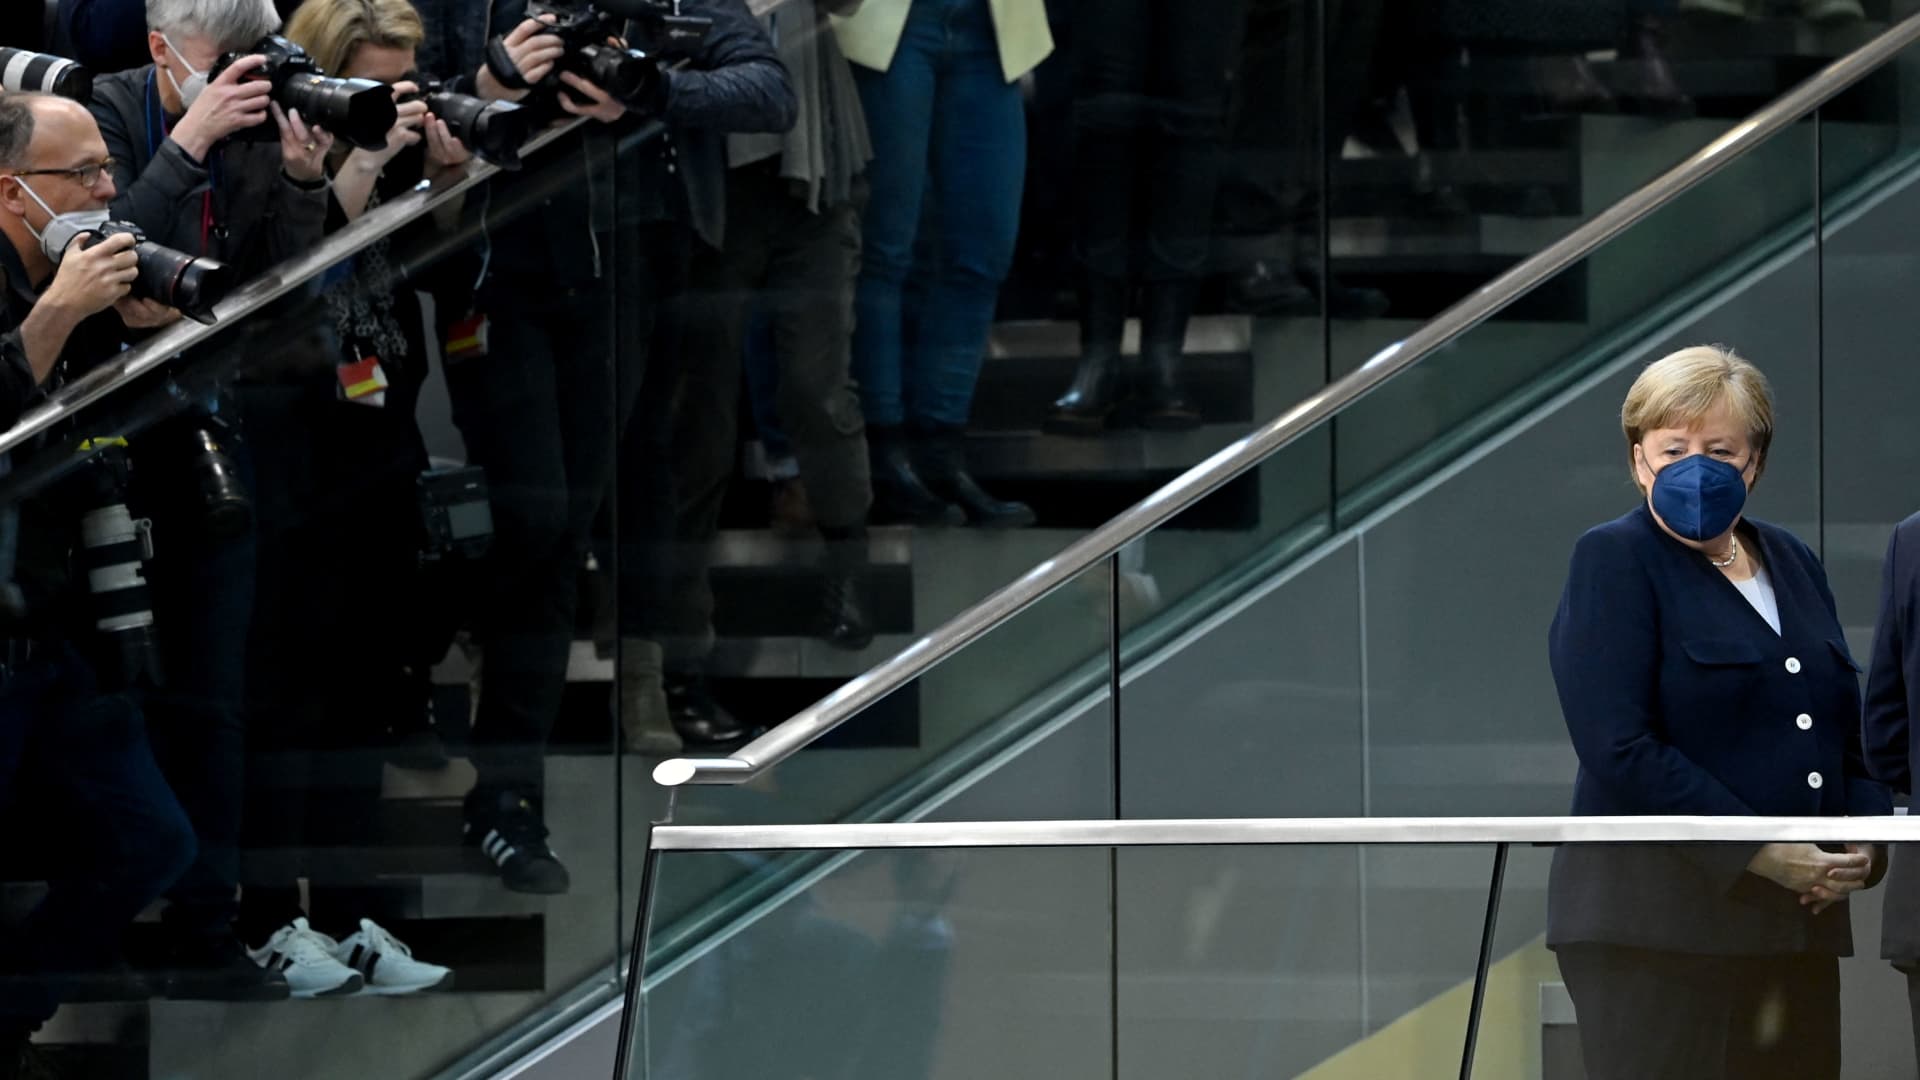 Outgoing German Chancellor Angela Merkel is in the focus of photographers as she stands on the tribune prior to a session at the Bundestag in Berlin.